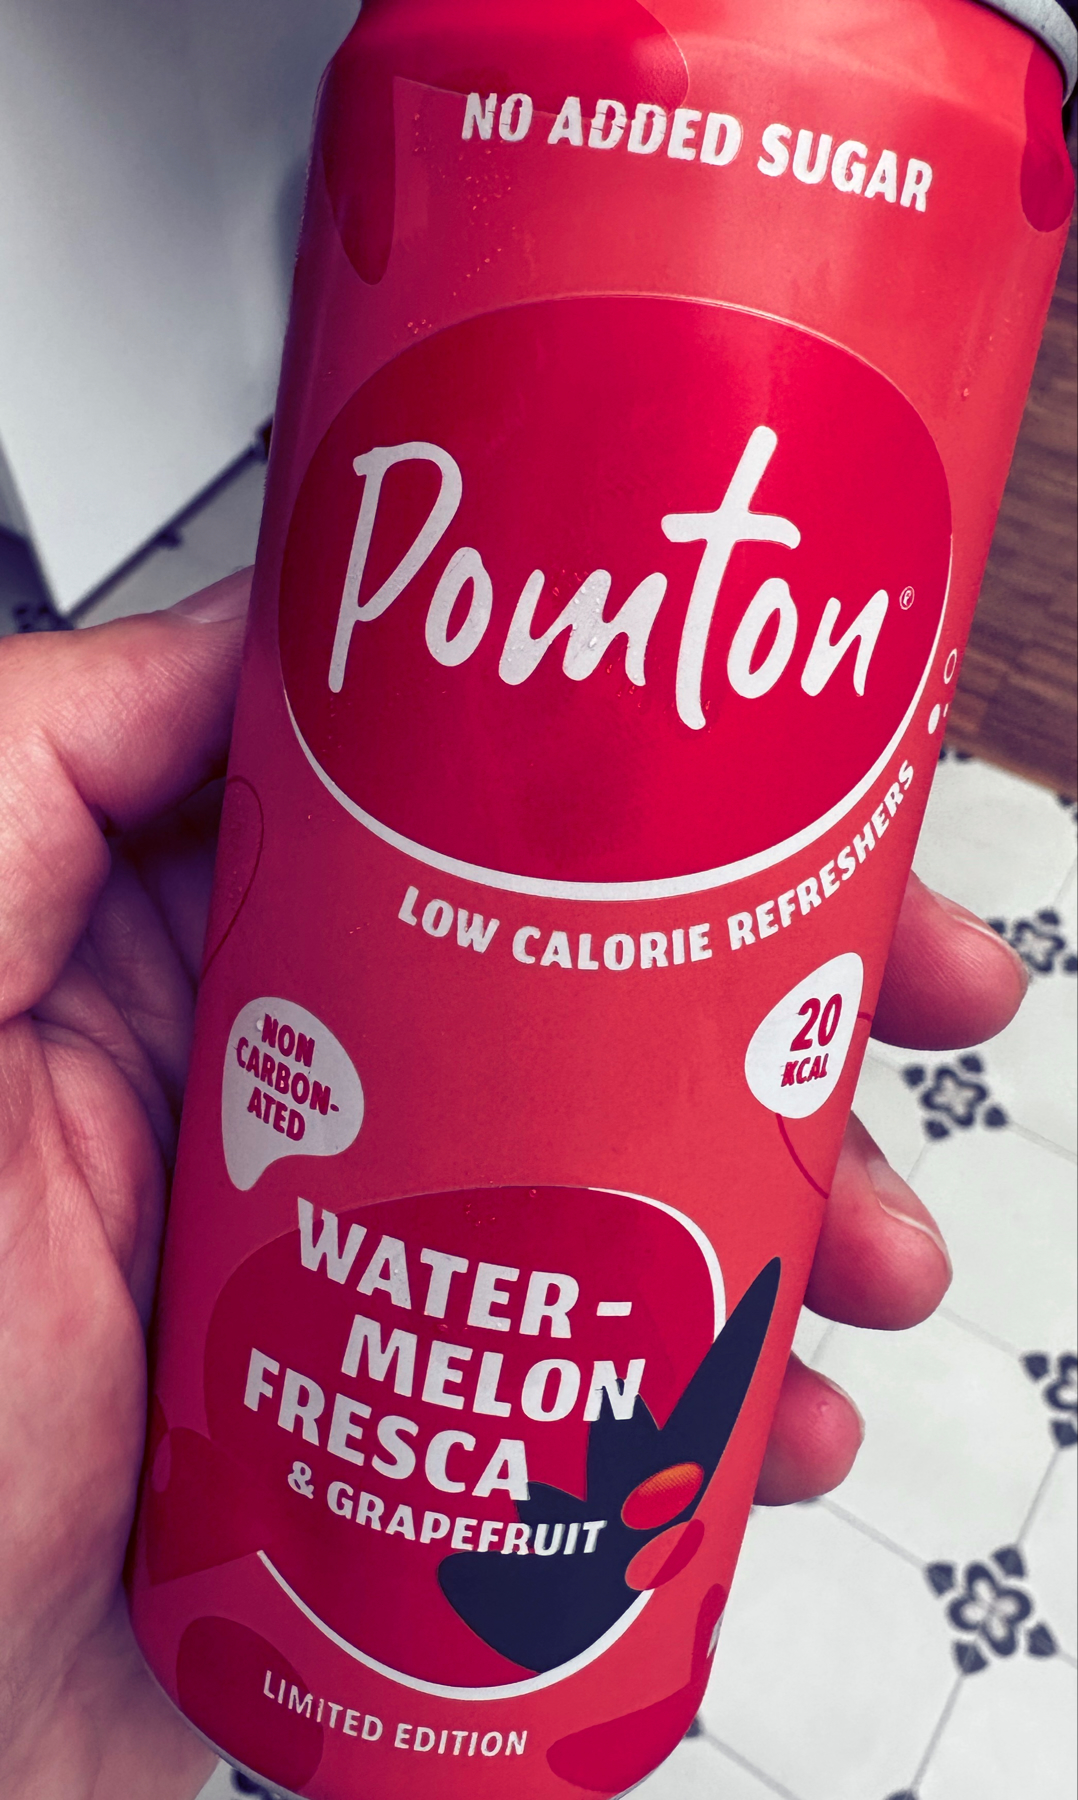 a can of watermelon & grapefruit, a pomton variant